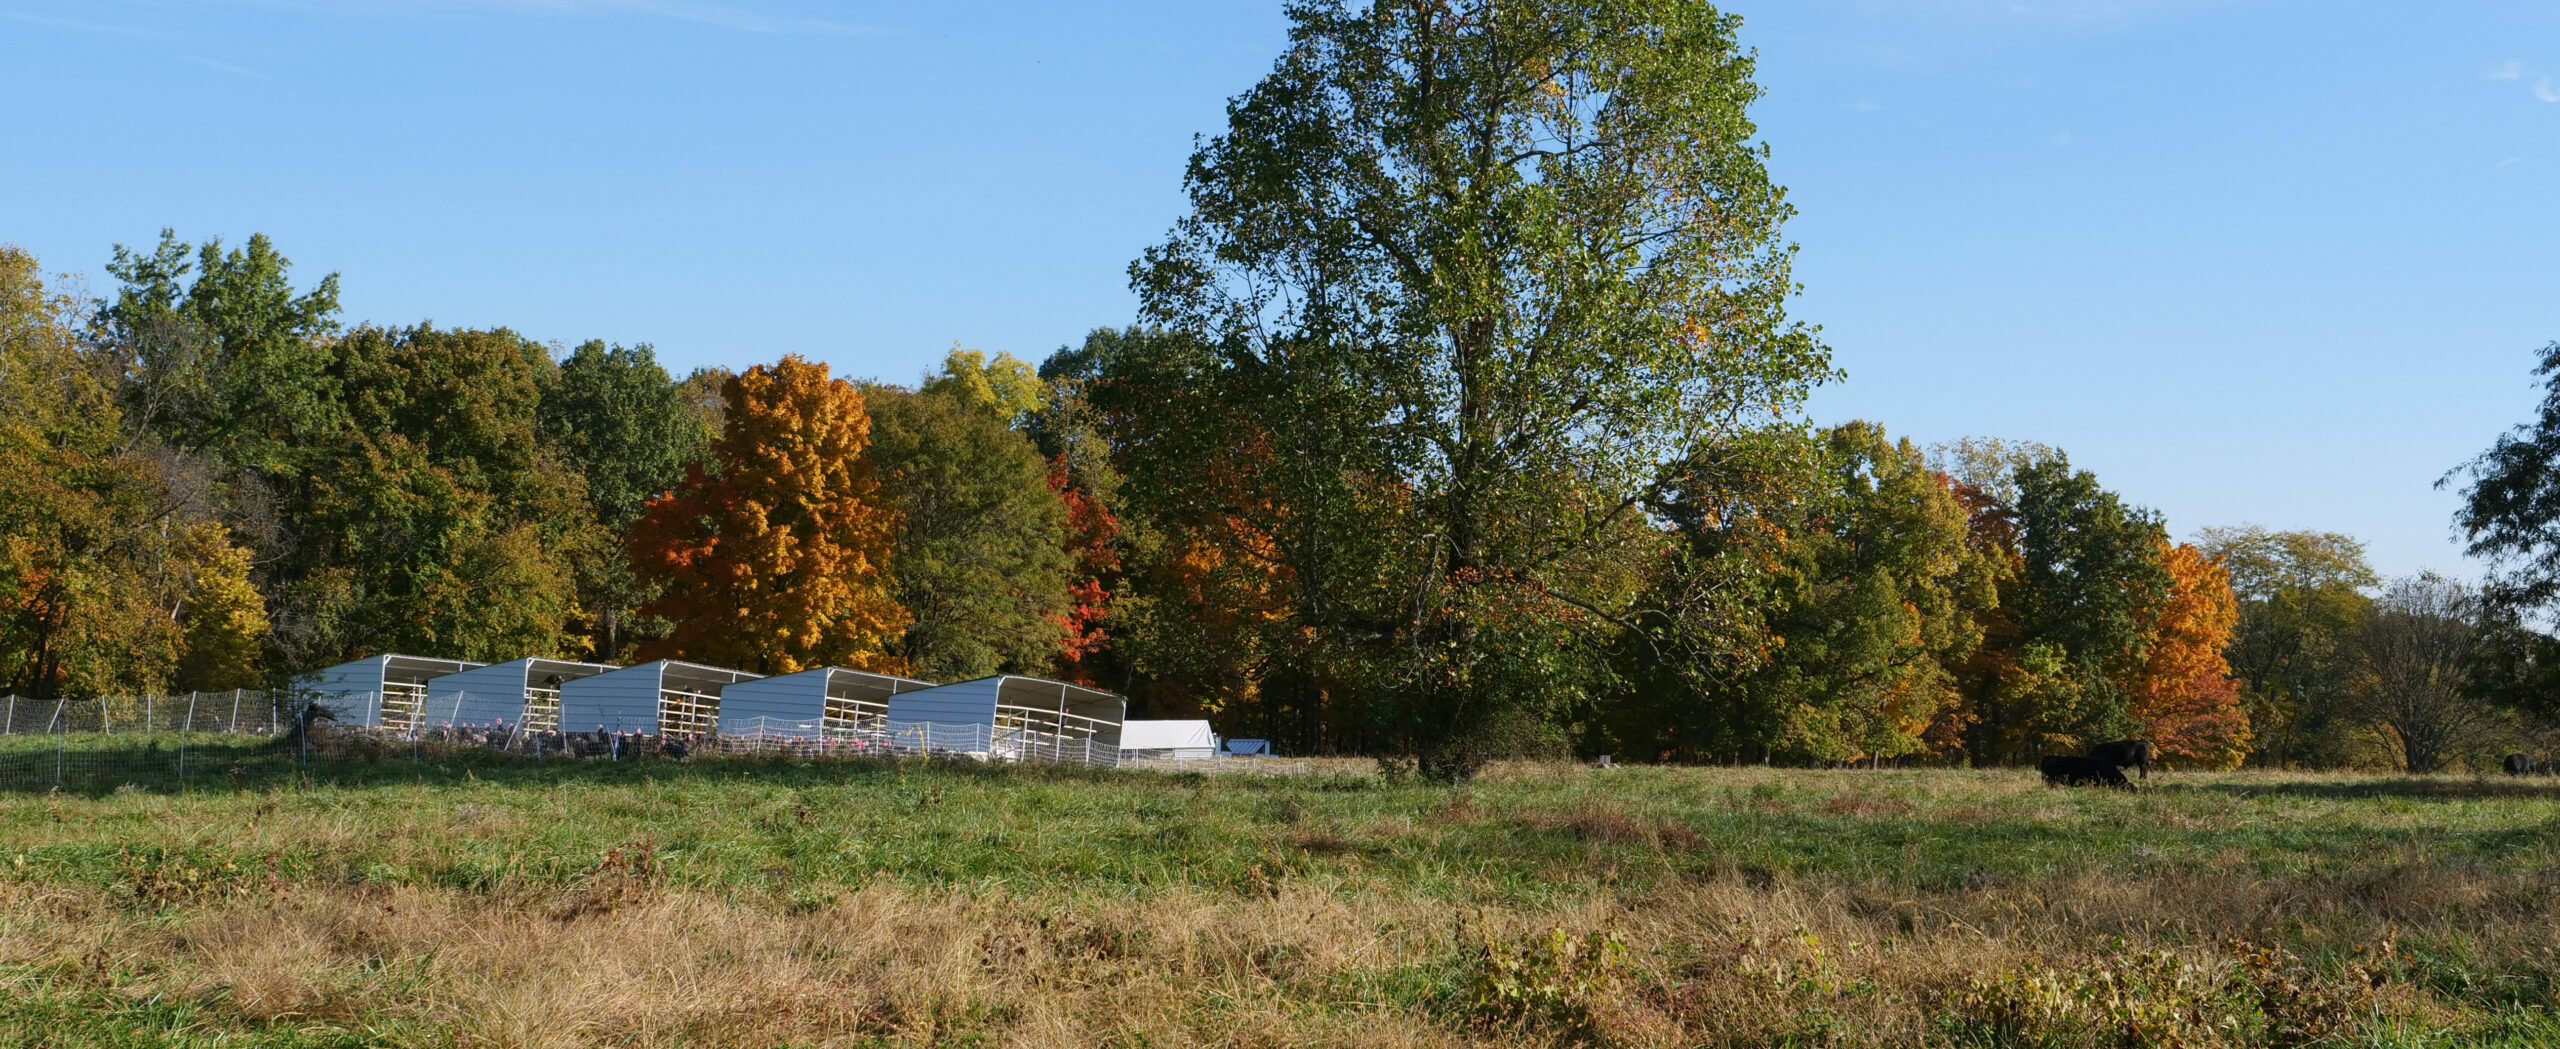 turkeys in a green pasture with fall foliage in background